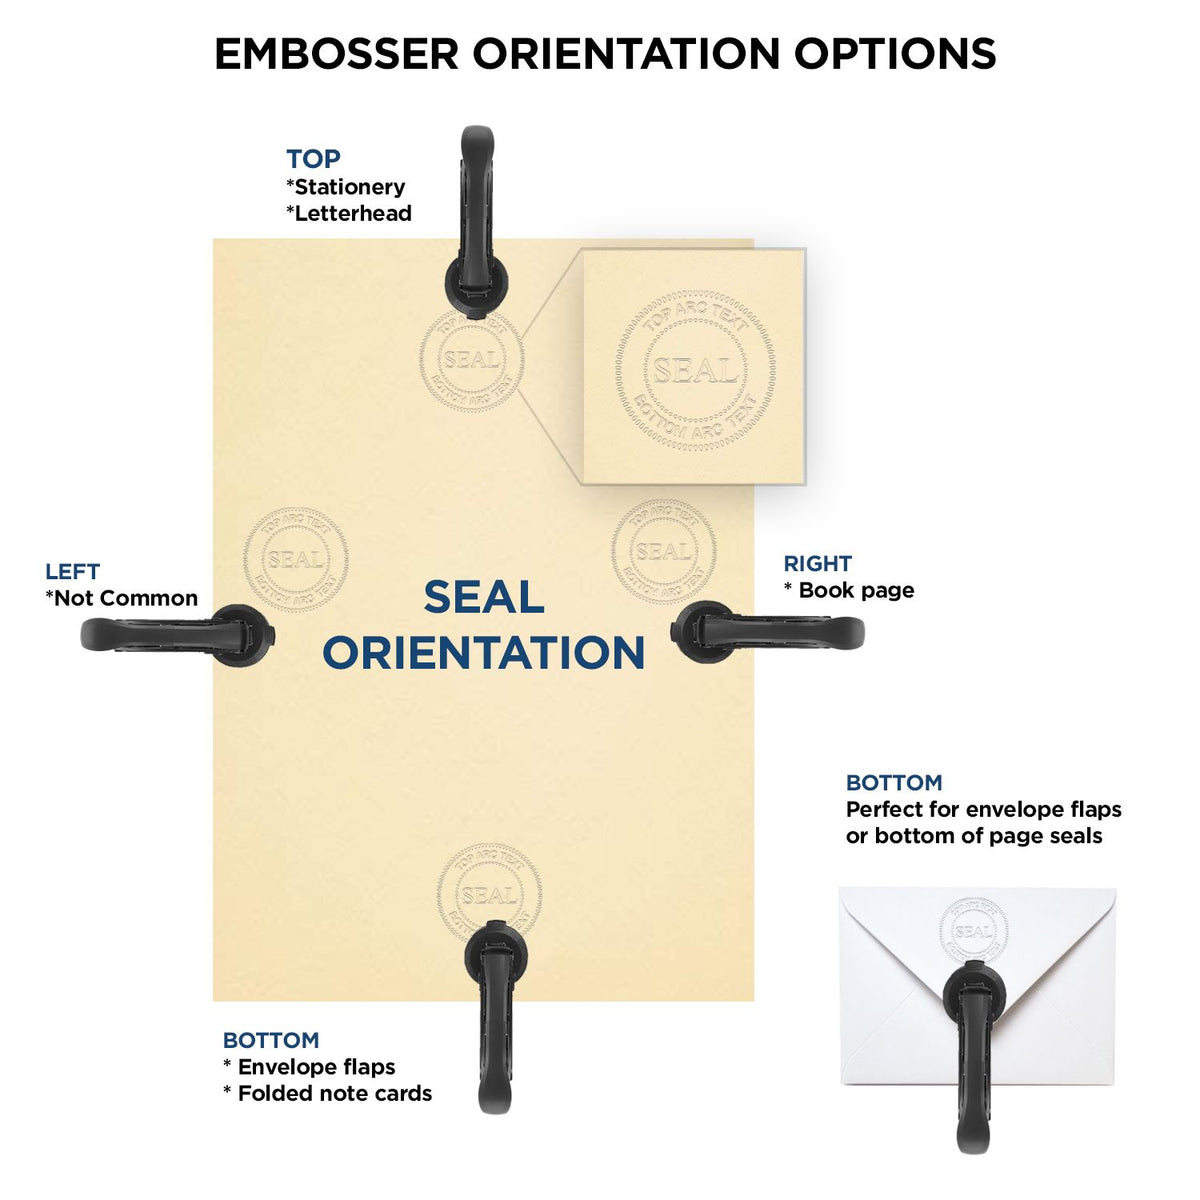 An infographic for the Nevada Geologist Desk Seal showing embosser orientation, this is showing examples of a top, bottom, right and left insert.